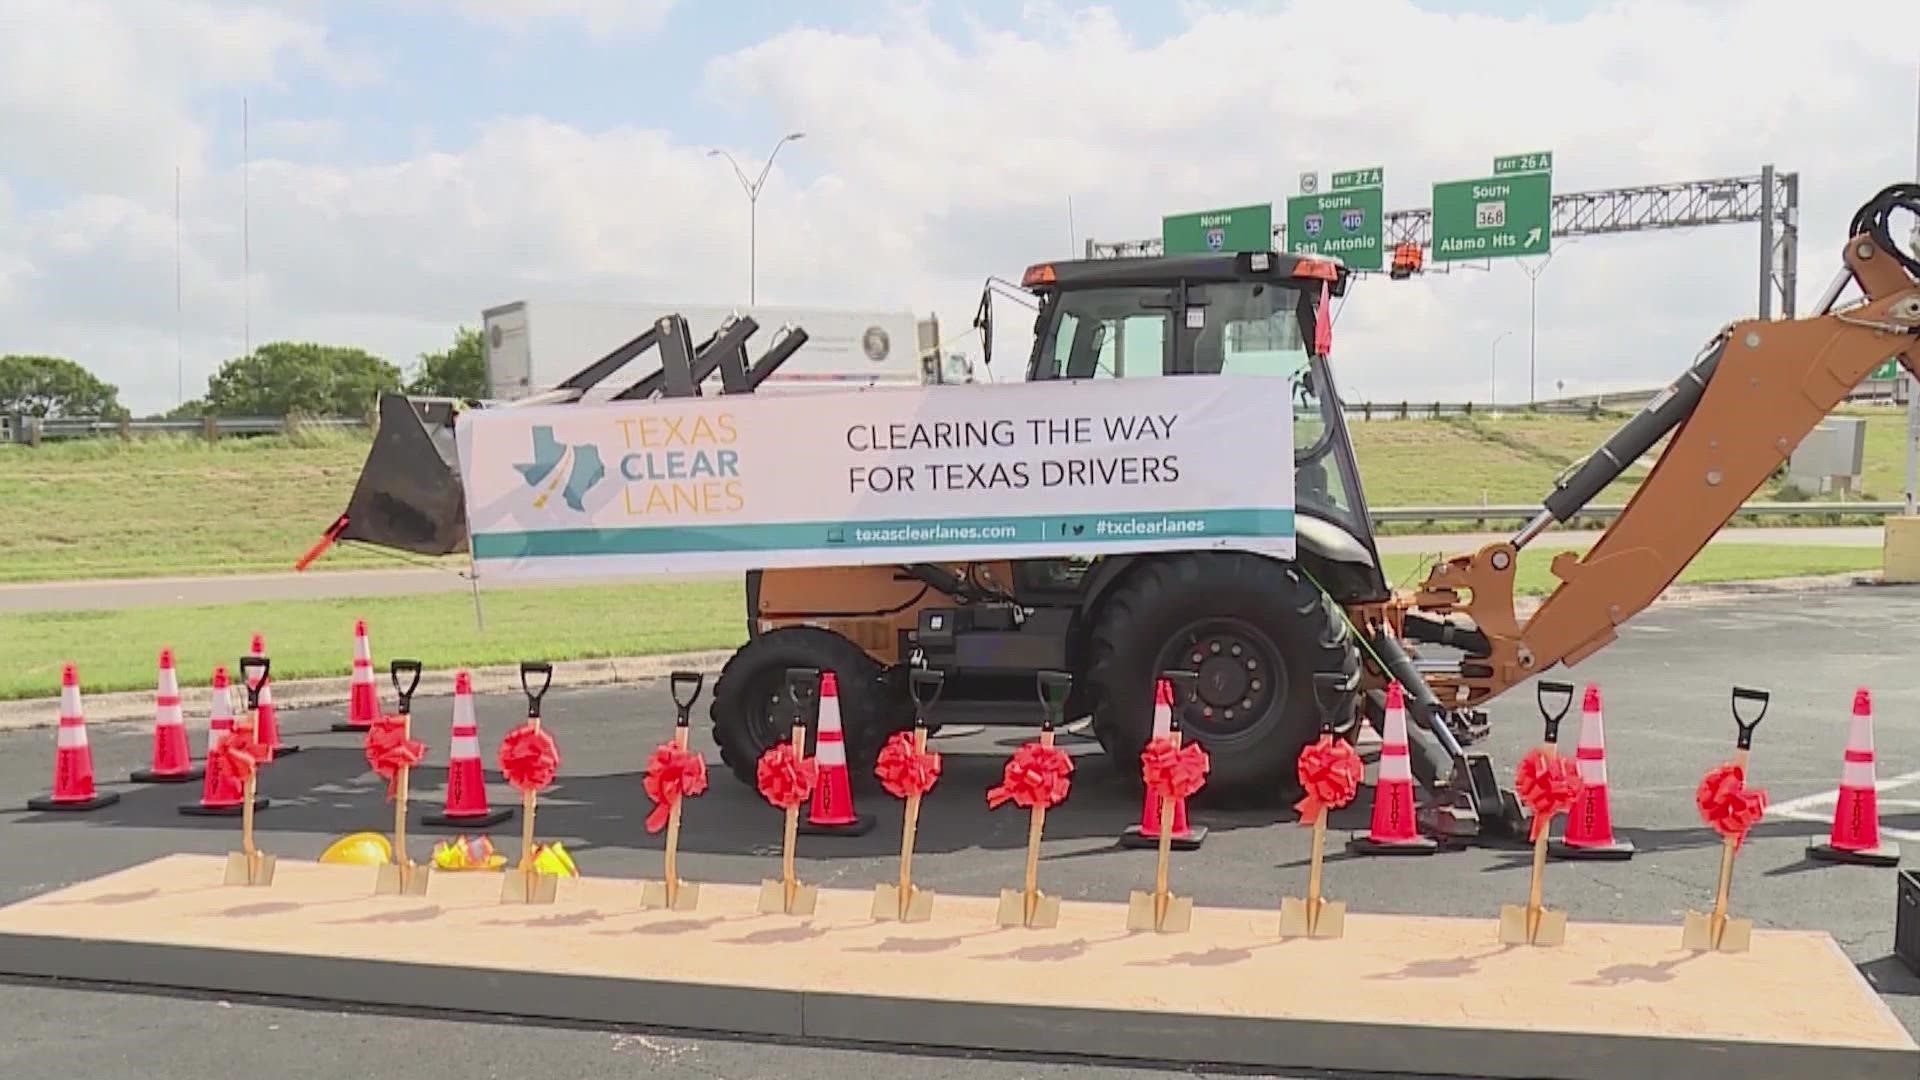 “We do have ways of providing the traveling public with information so they can look at what the upcoming closures are for the week,” TxDOT said.